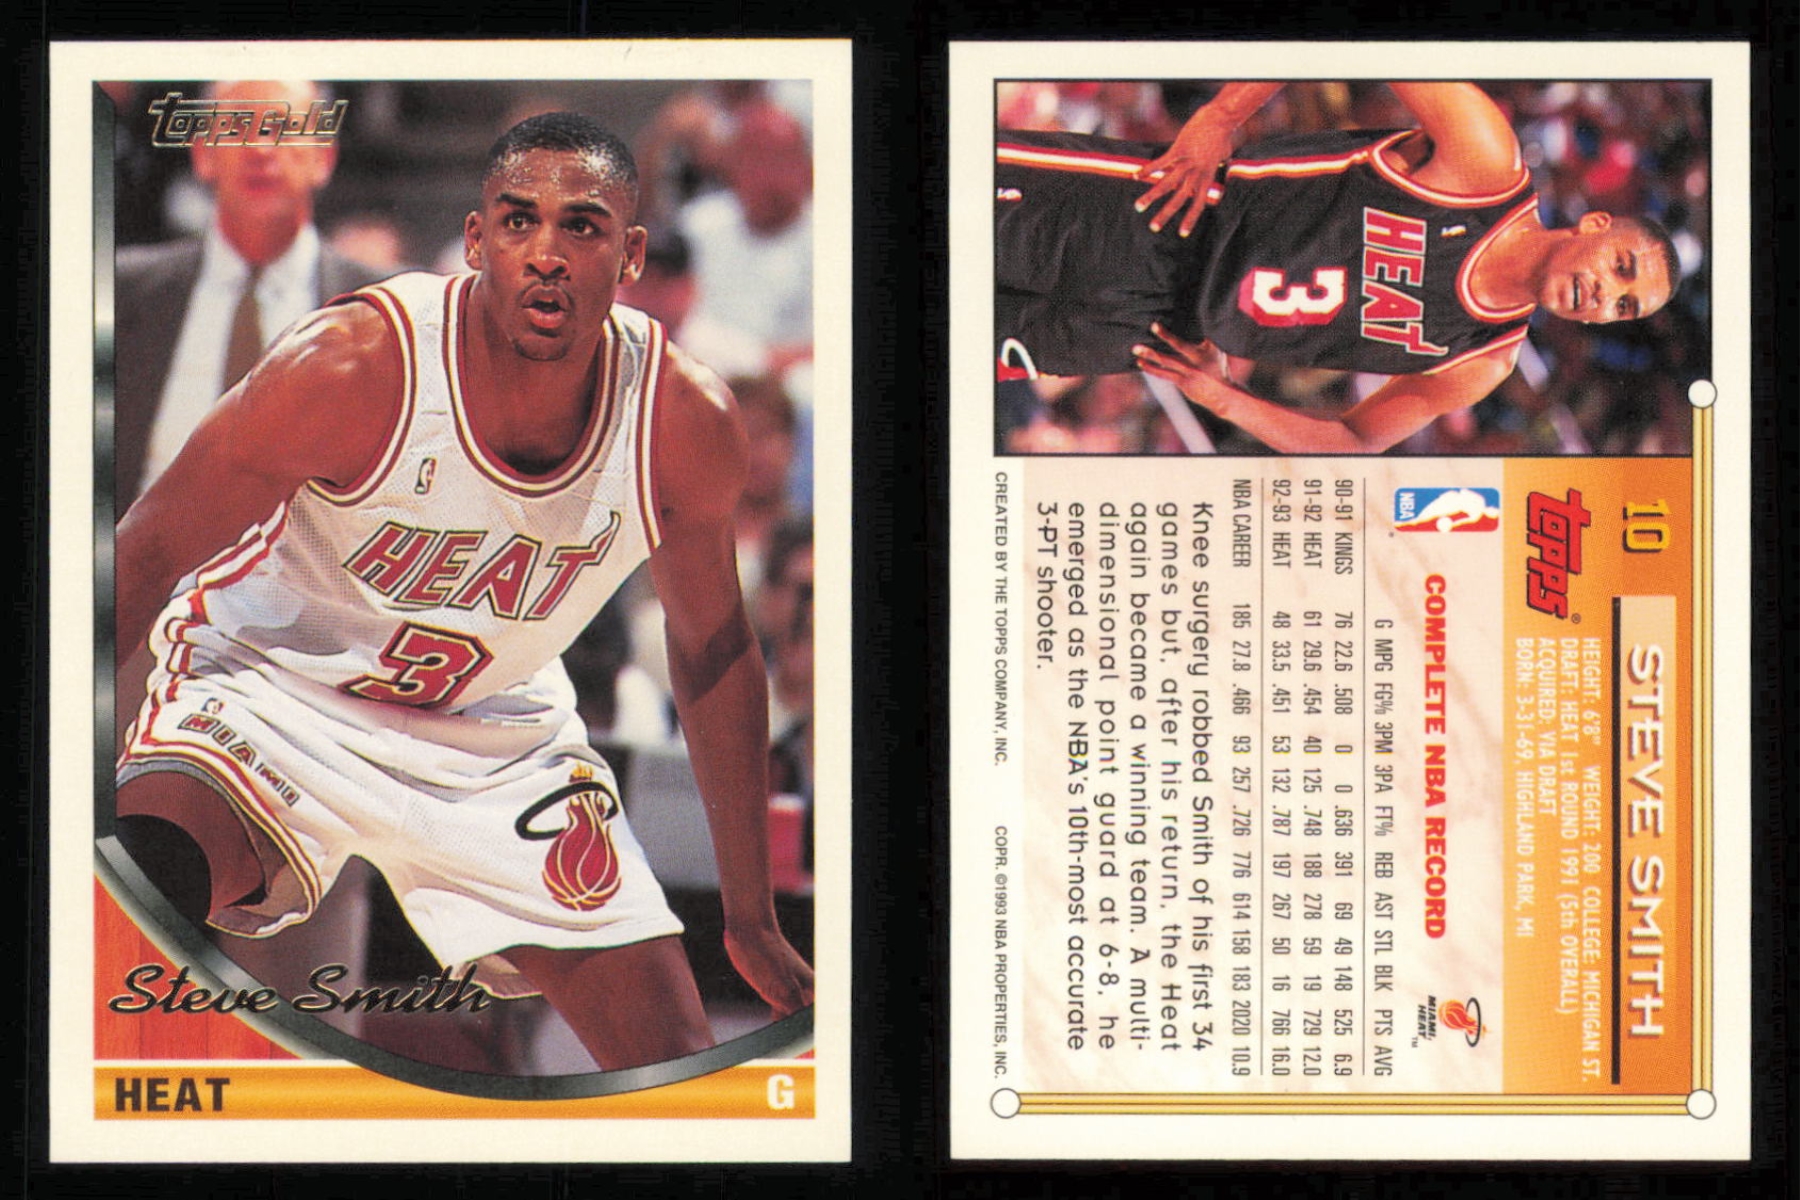 A2561 - You Pick 1993-94 Topps Basketball Gold Card #s 1-200 10+ FREE SHIP 